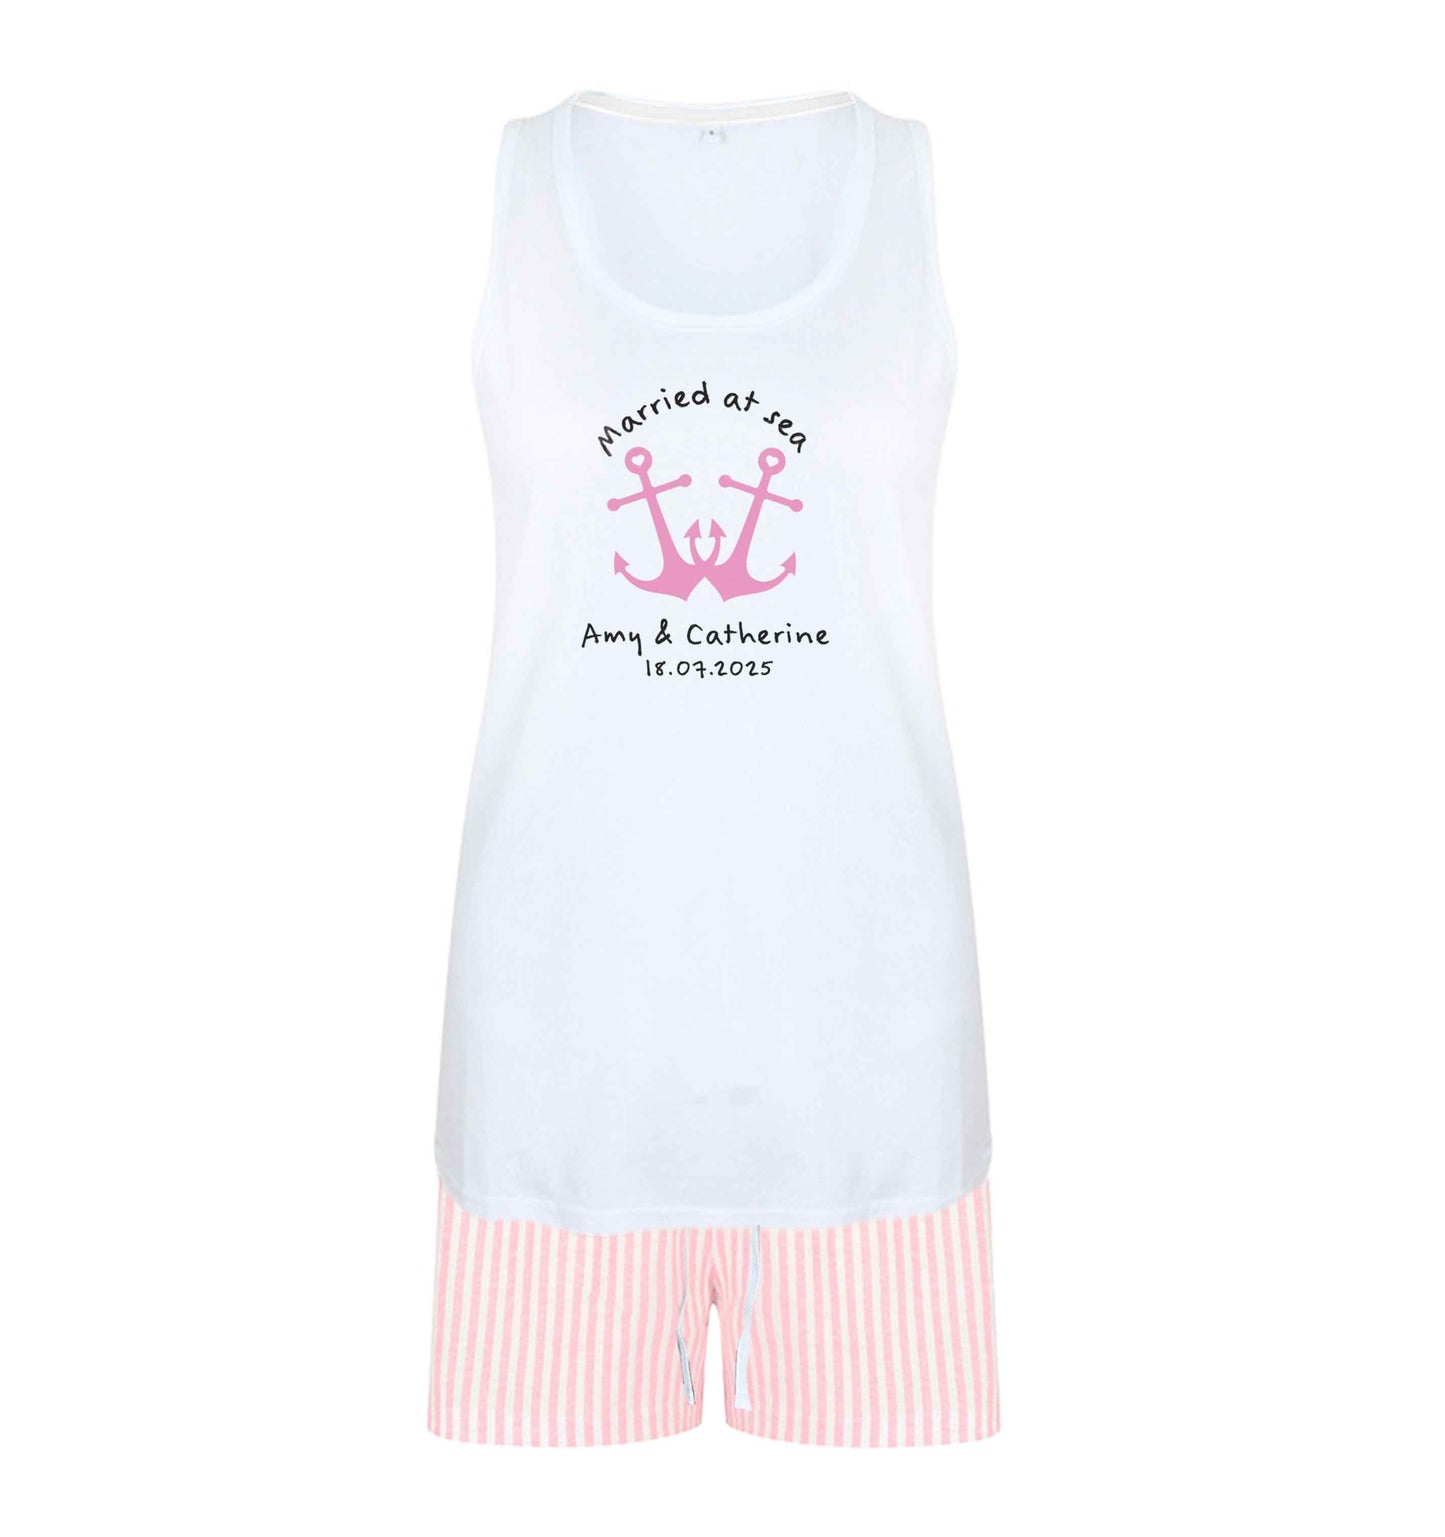 Married at sea pink anchors size XL women's pyjama shorts set in pink 